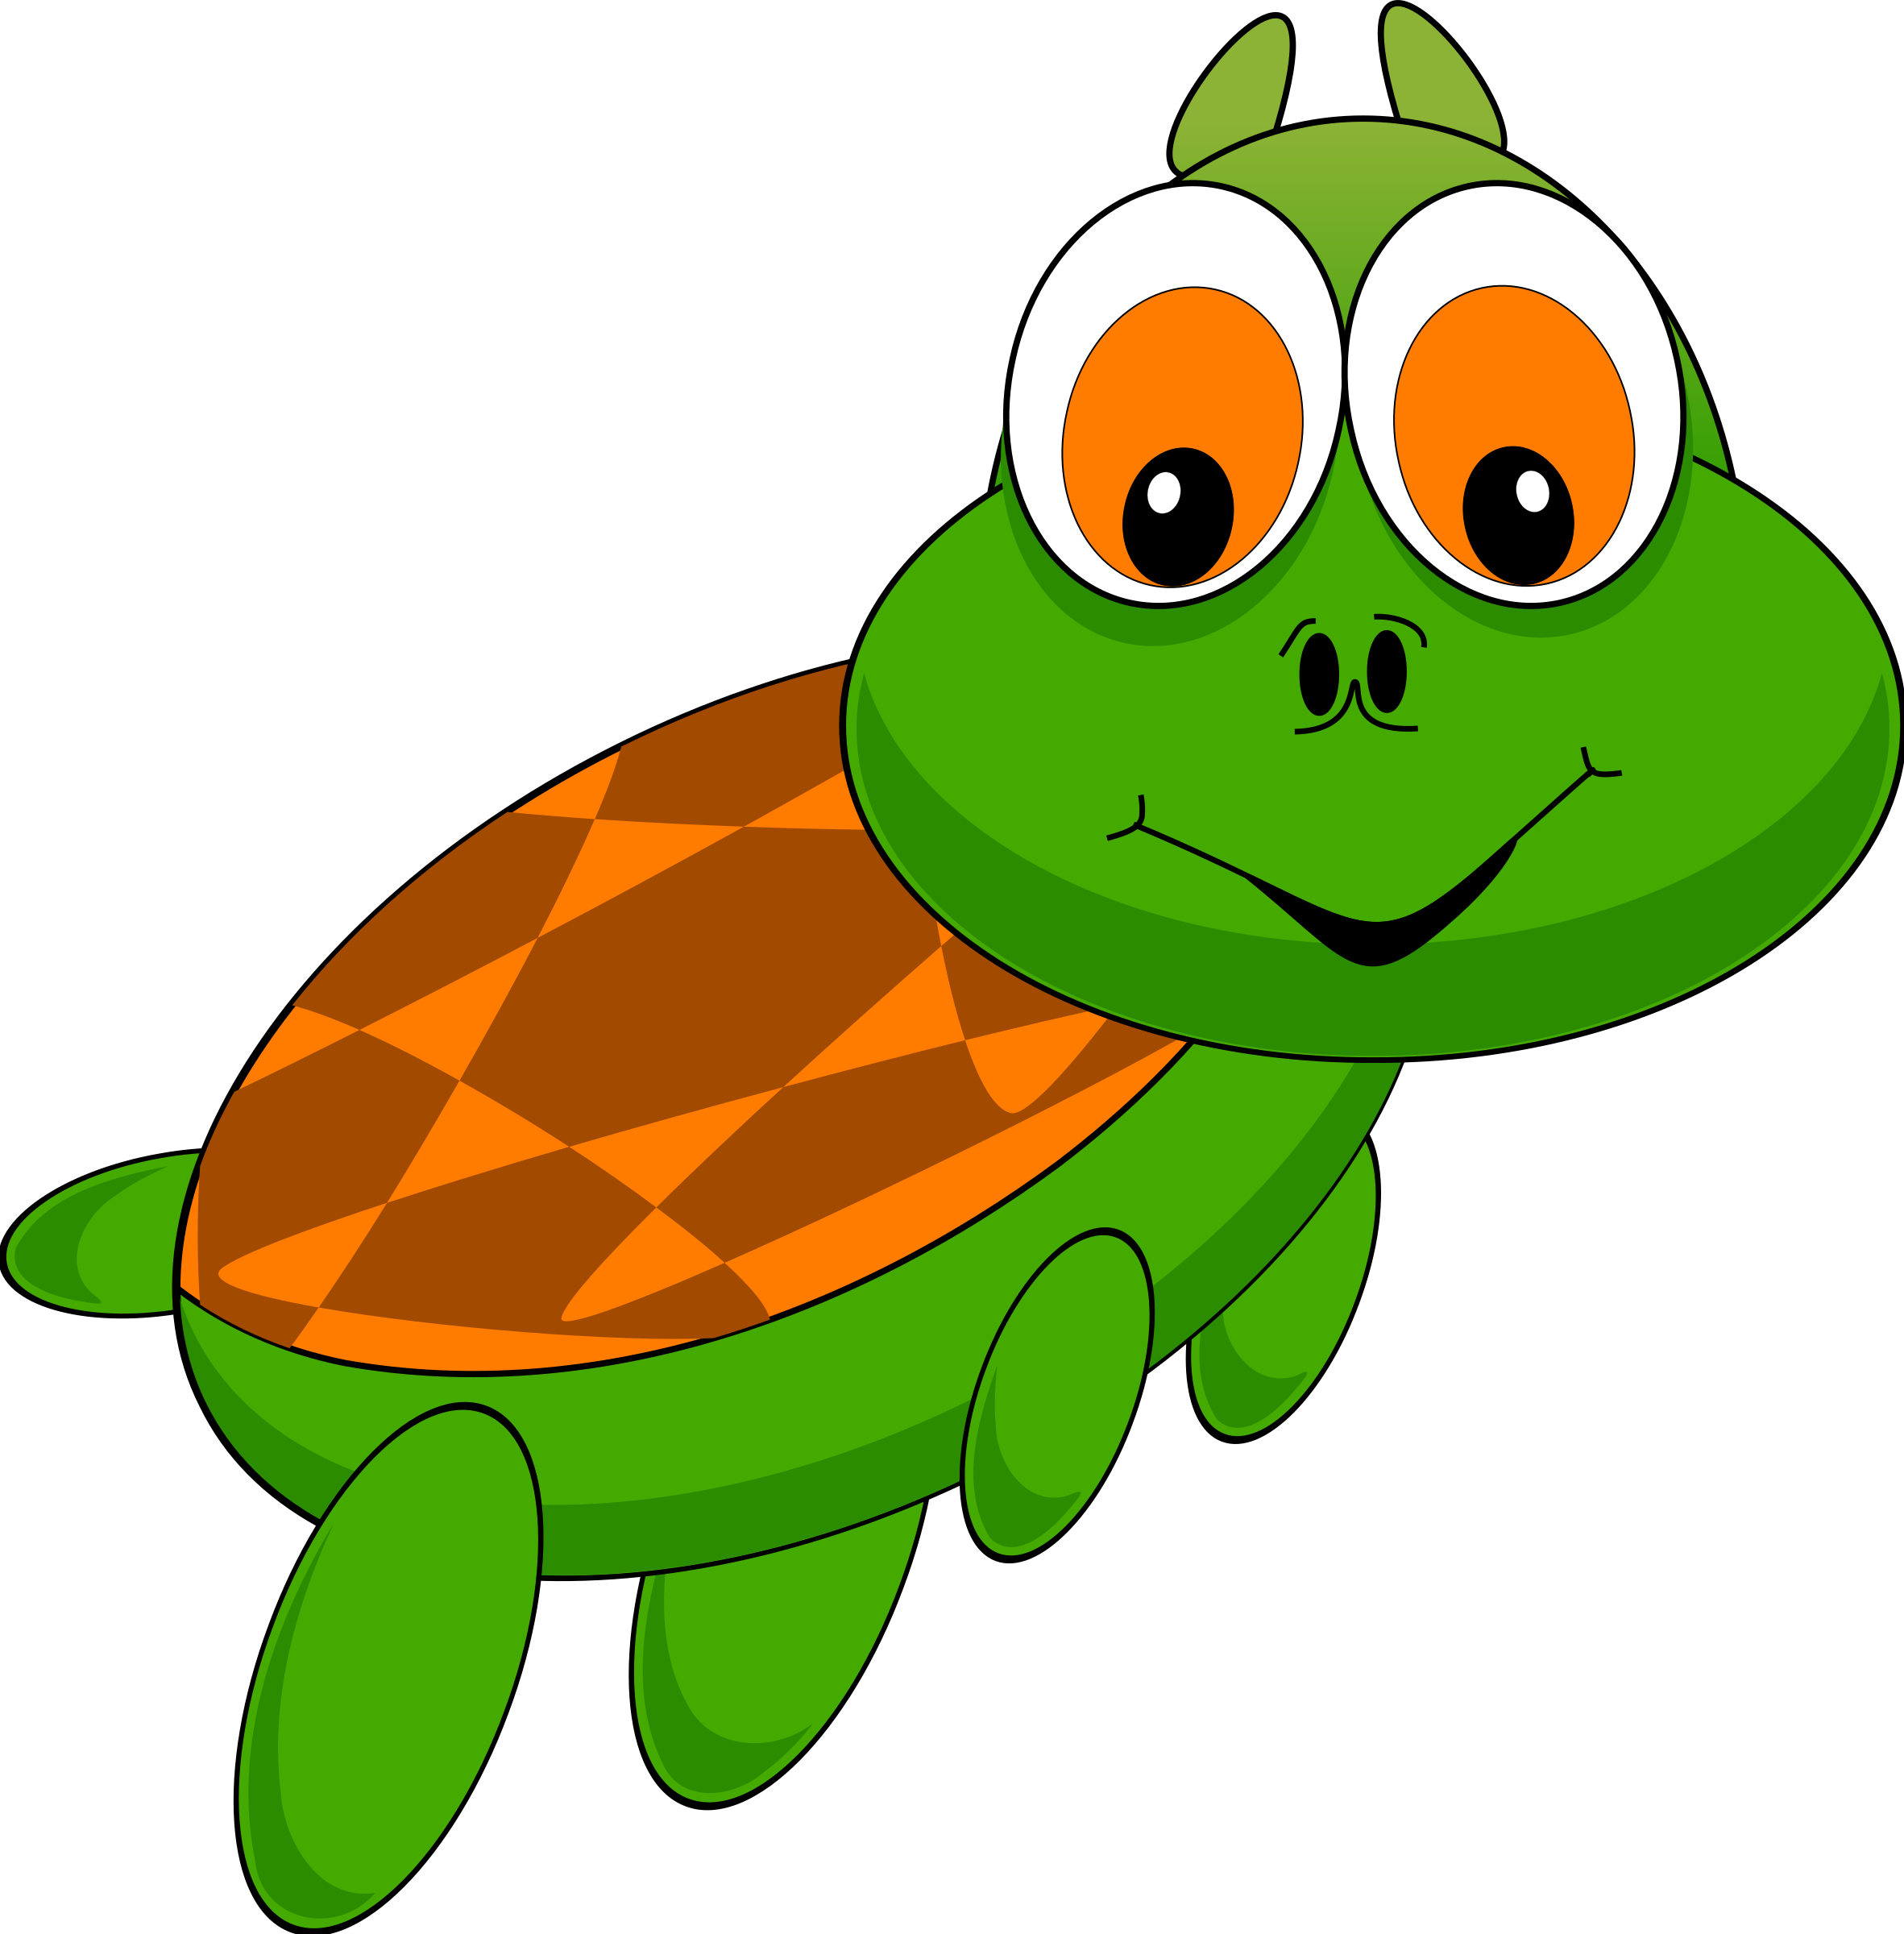 Download Turtle, Tortoise, Animal, Cartoon, Zoo, Funny, Comic - Clipart  Transparent Background Turtle PNG Image with No Background 